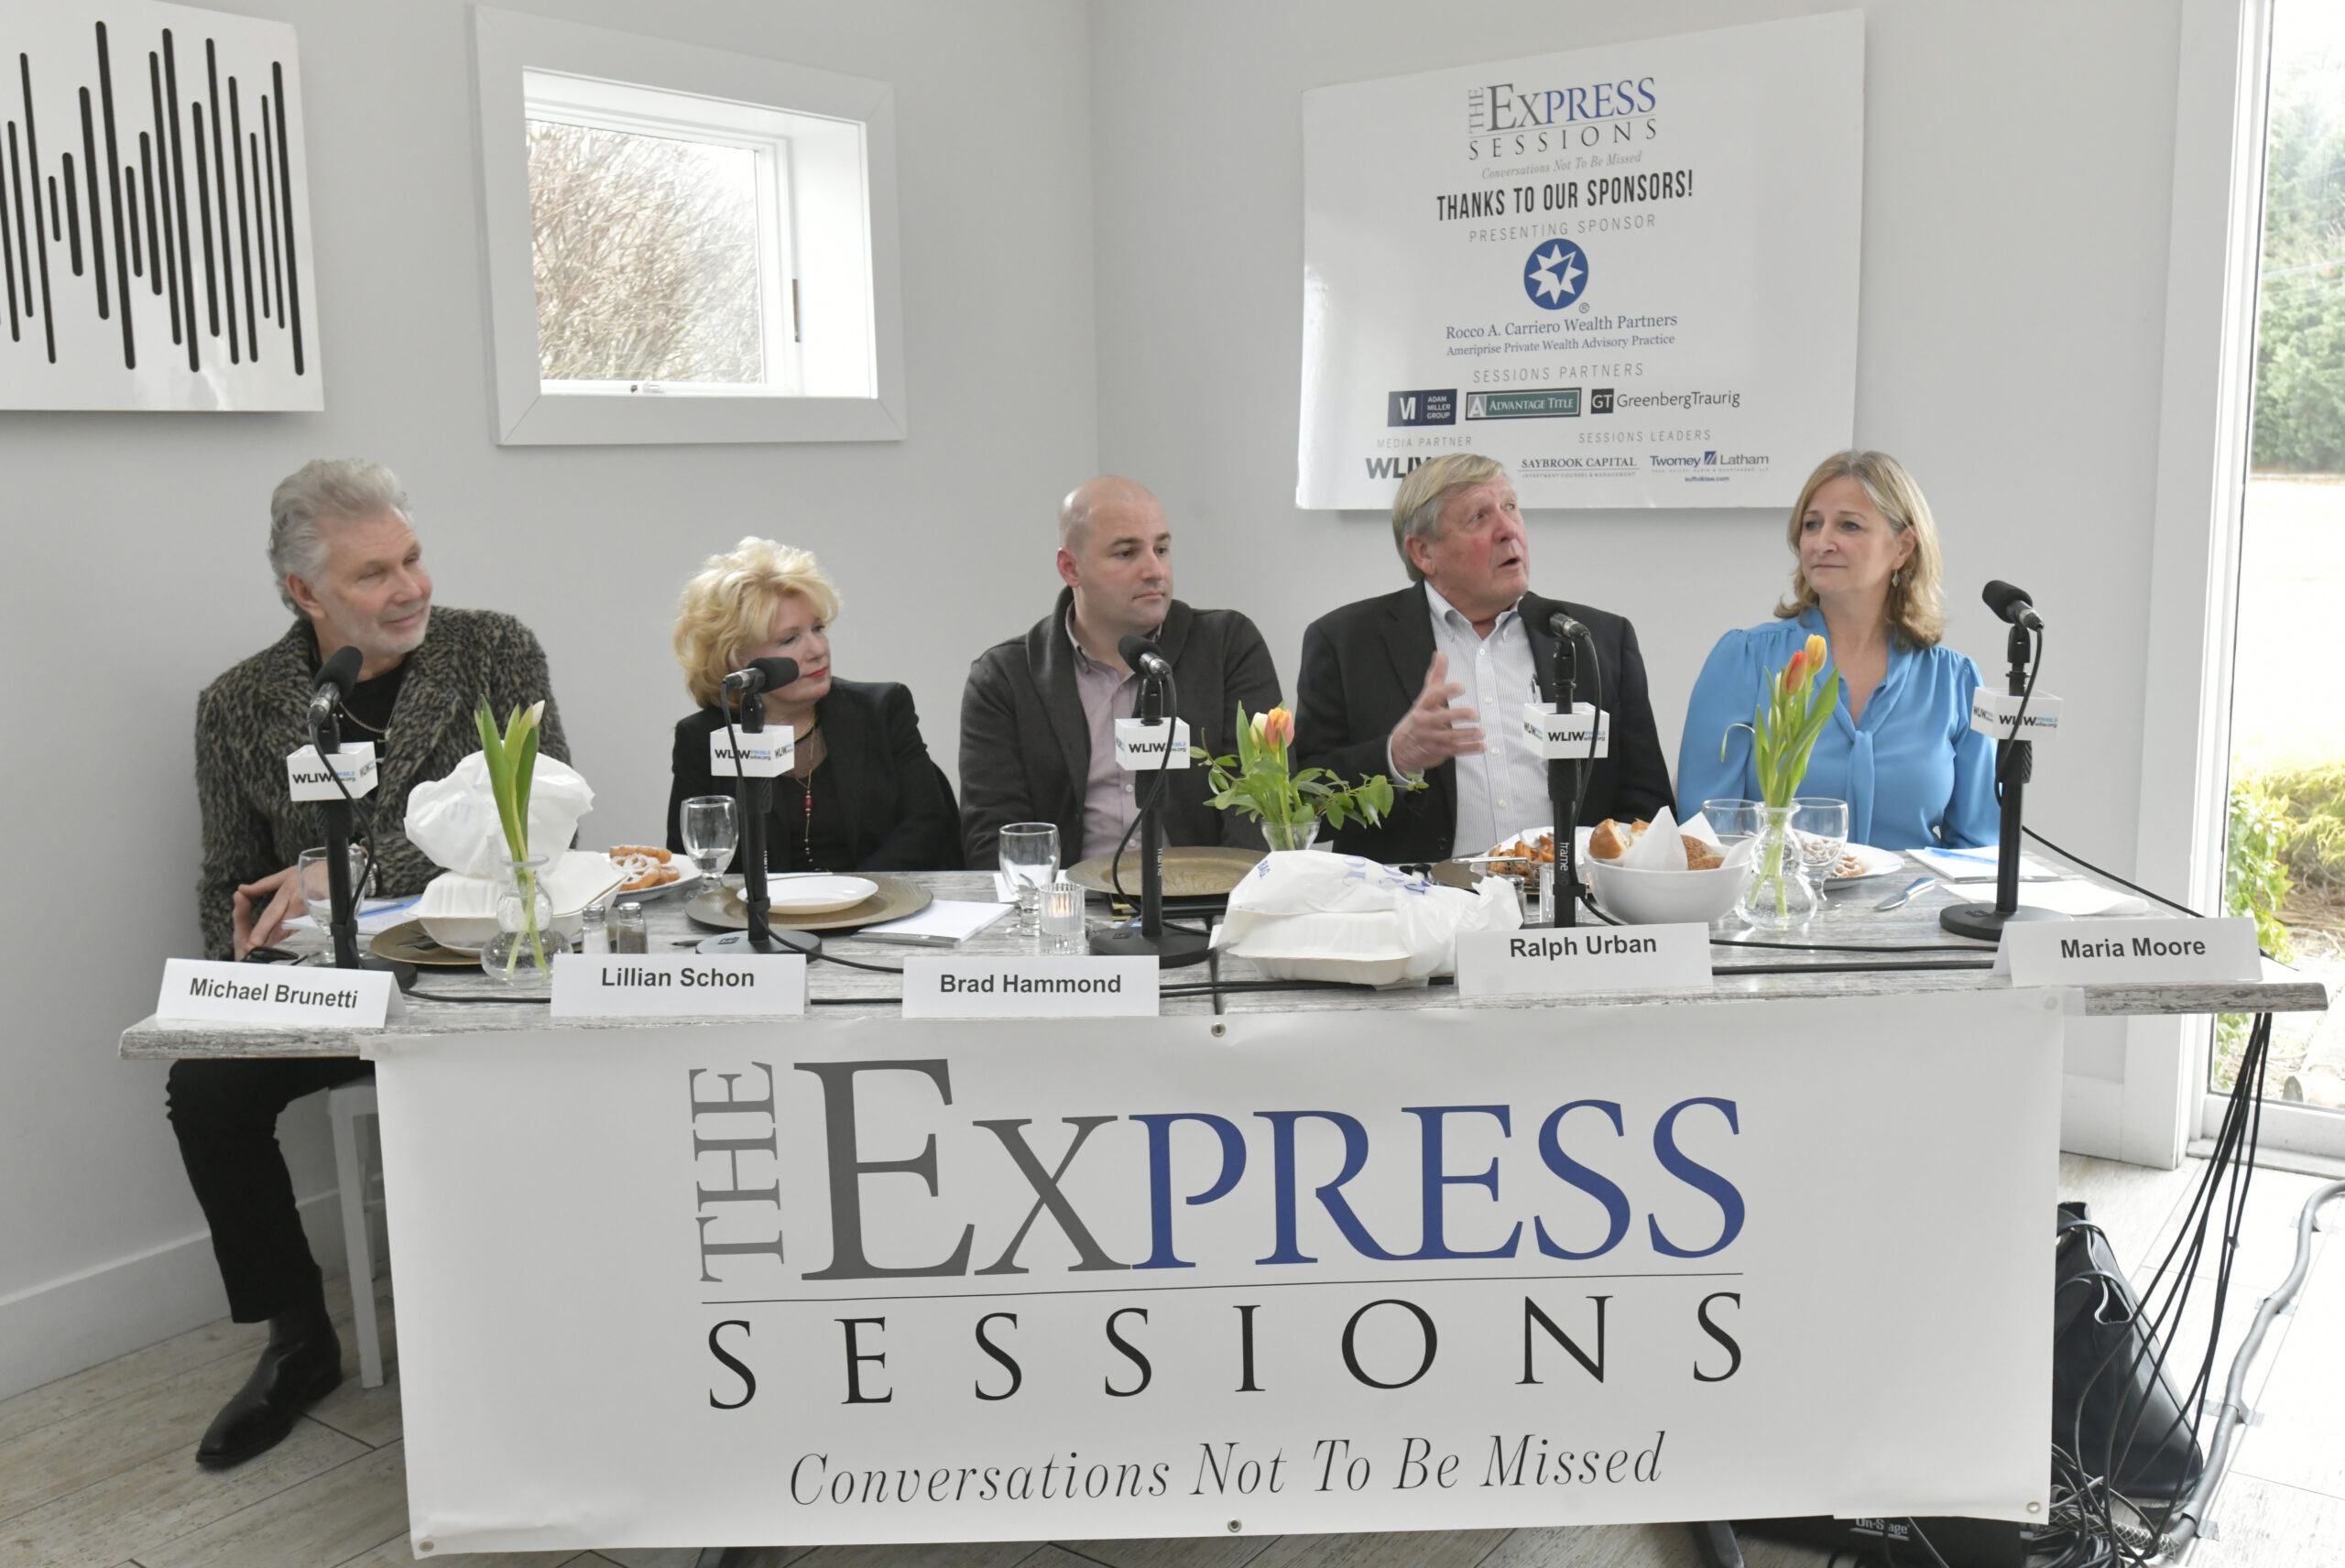 The panel, Michael Brunetti, Lillian Schon, Brad Hammond, Ralph Urban and Maria Moore, at the Express Session at Buoy One on January 26.   DANA SHAW